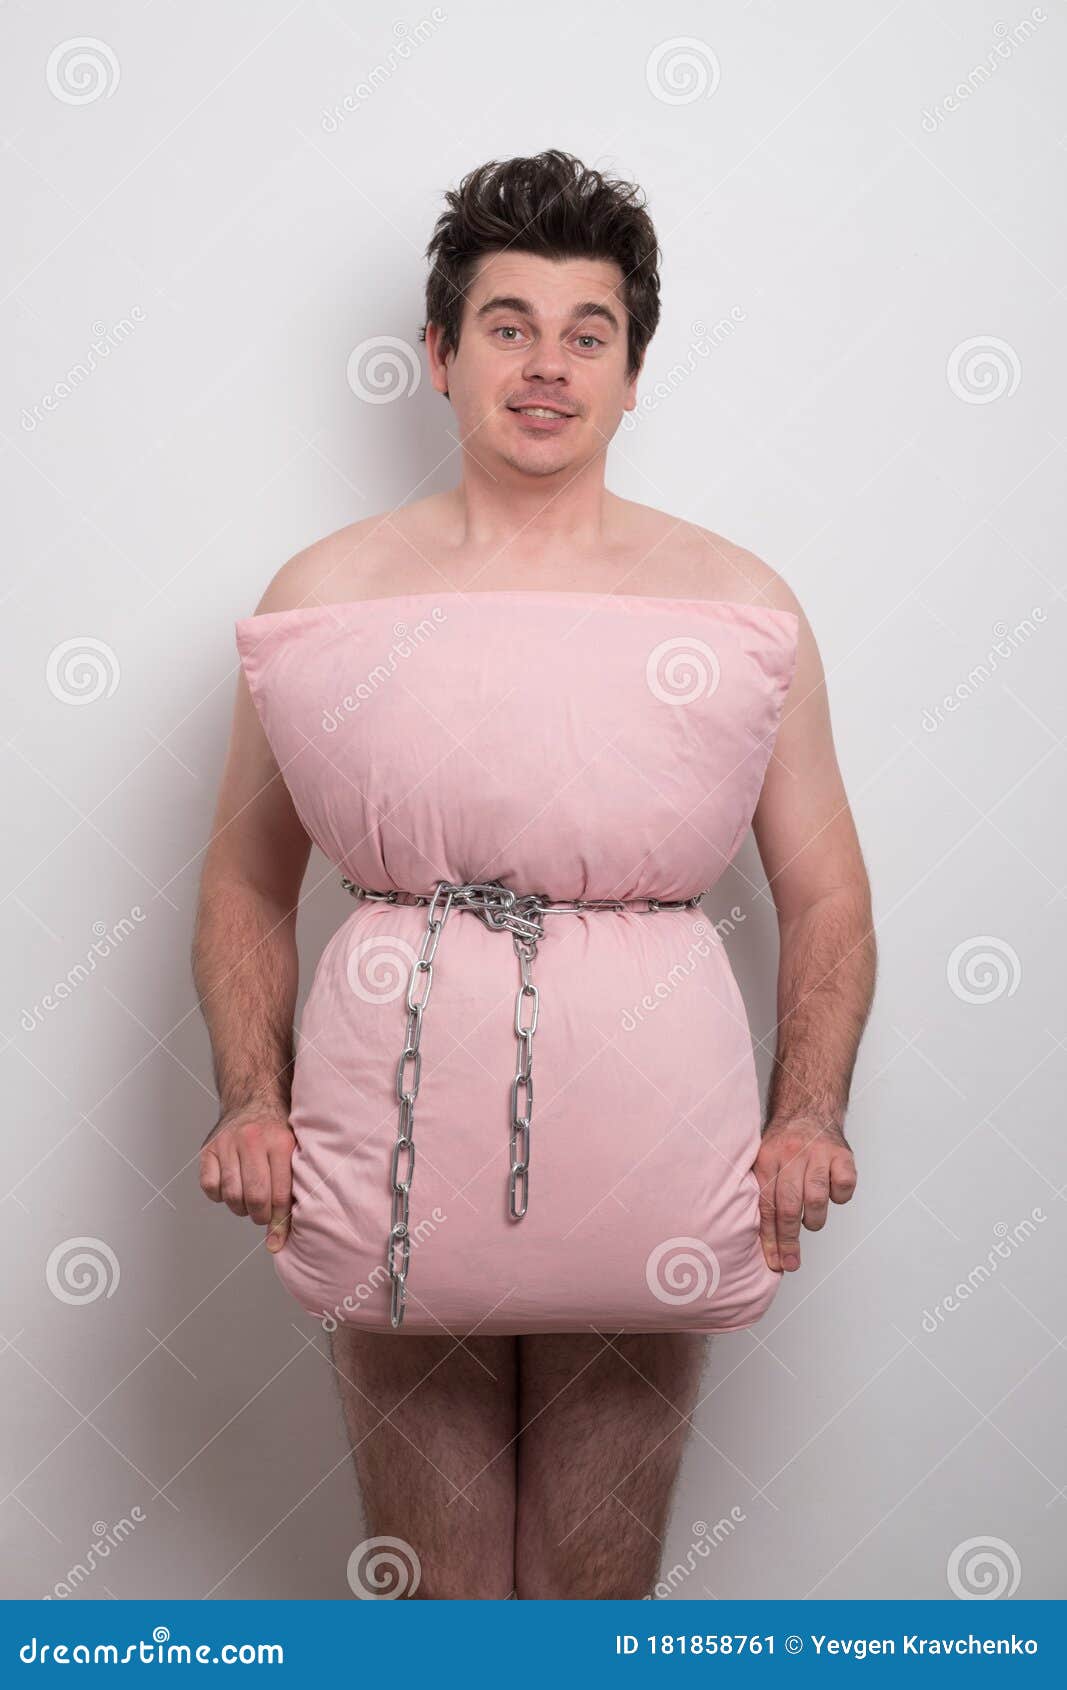 Funny Young Man Flashmob Pillow Dress Challenge in Social Networks in  Quarantine during Coronavirus. Man is Wearing a Pillow Dress Stock Image -  Image of model, challenge: 181858761